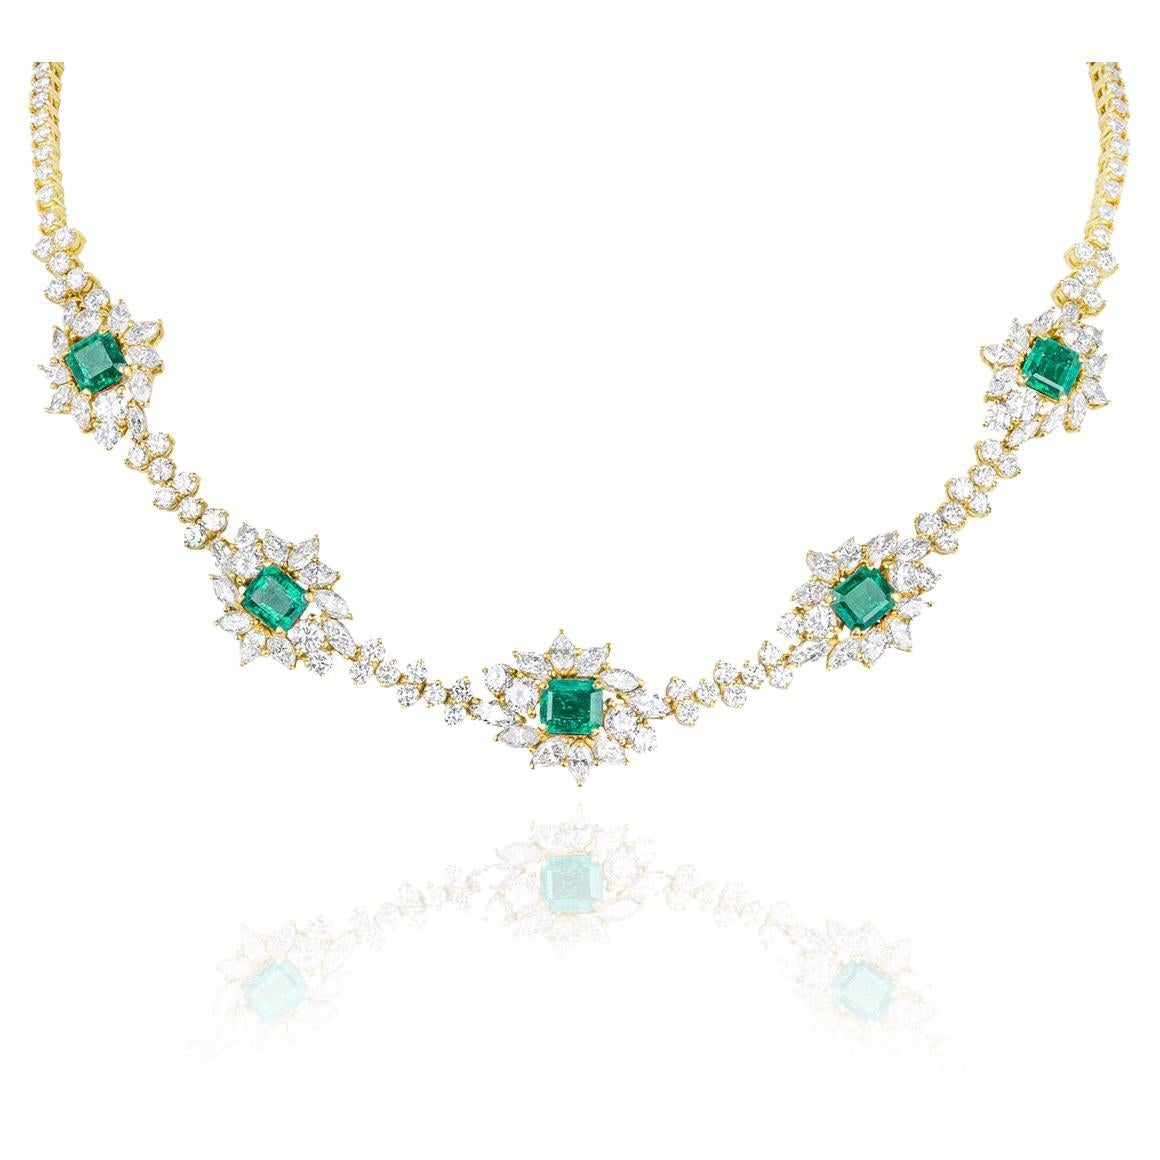 IGR Certified Yellow Gold Diamond and Columbian Emerald Necklace